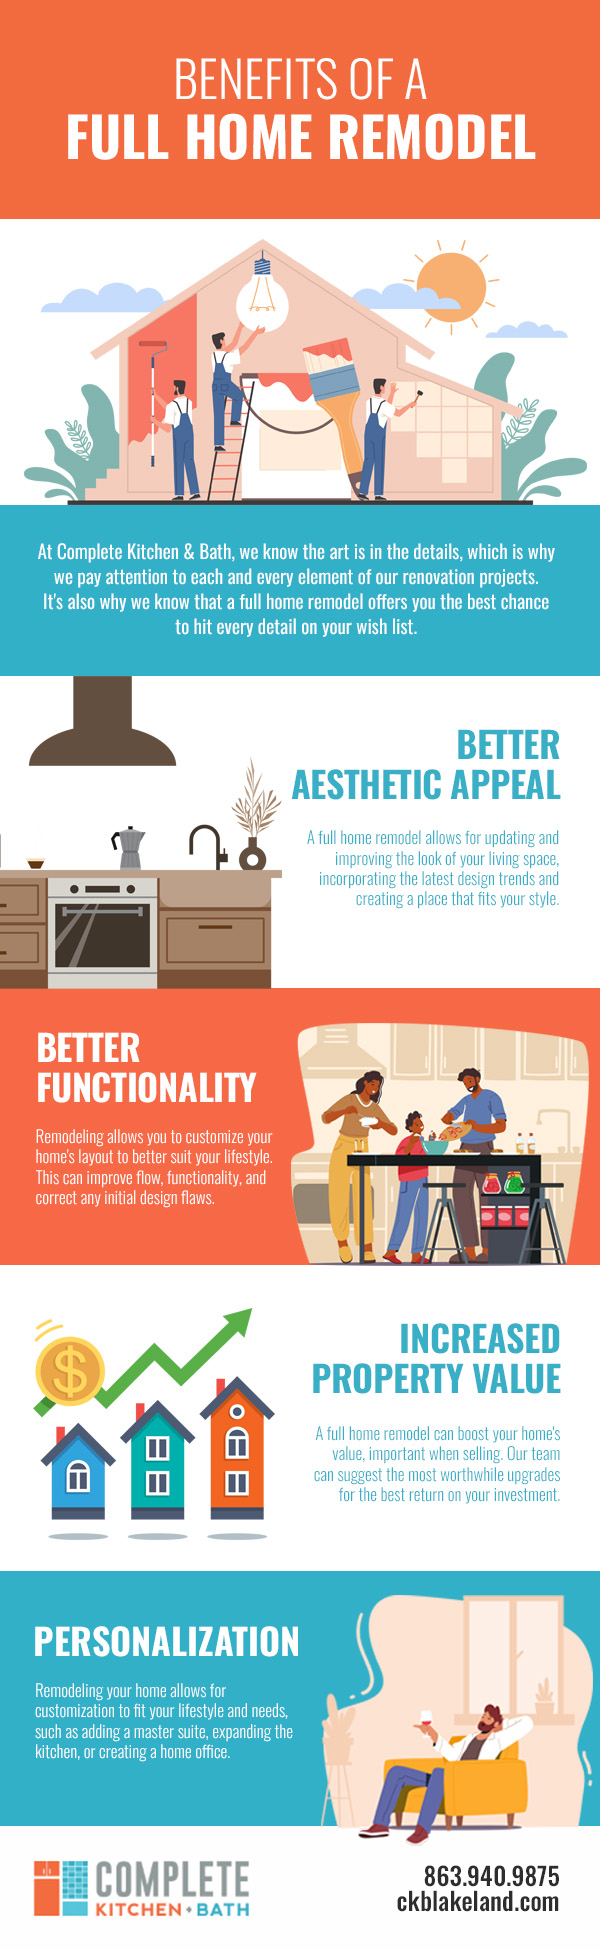 Benefits of a Full Home Remodel